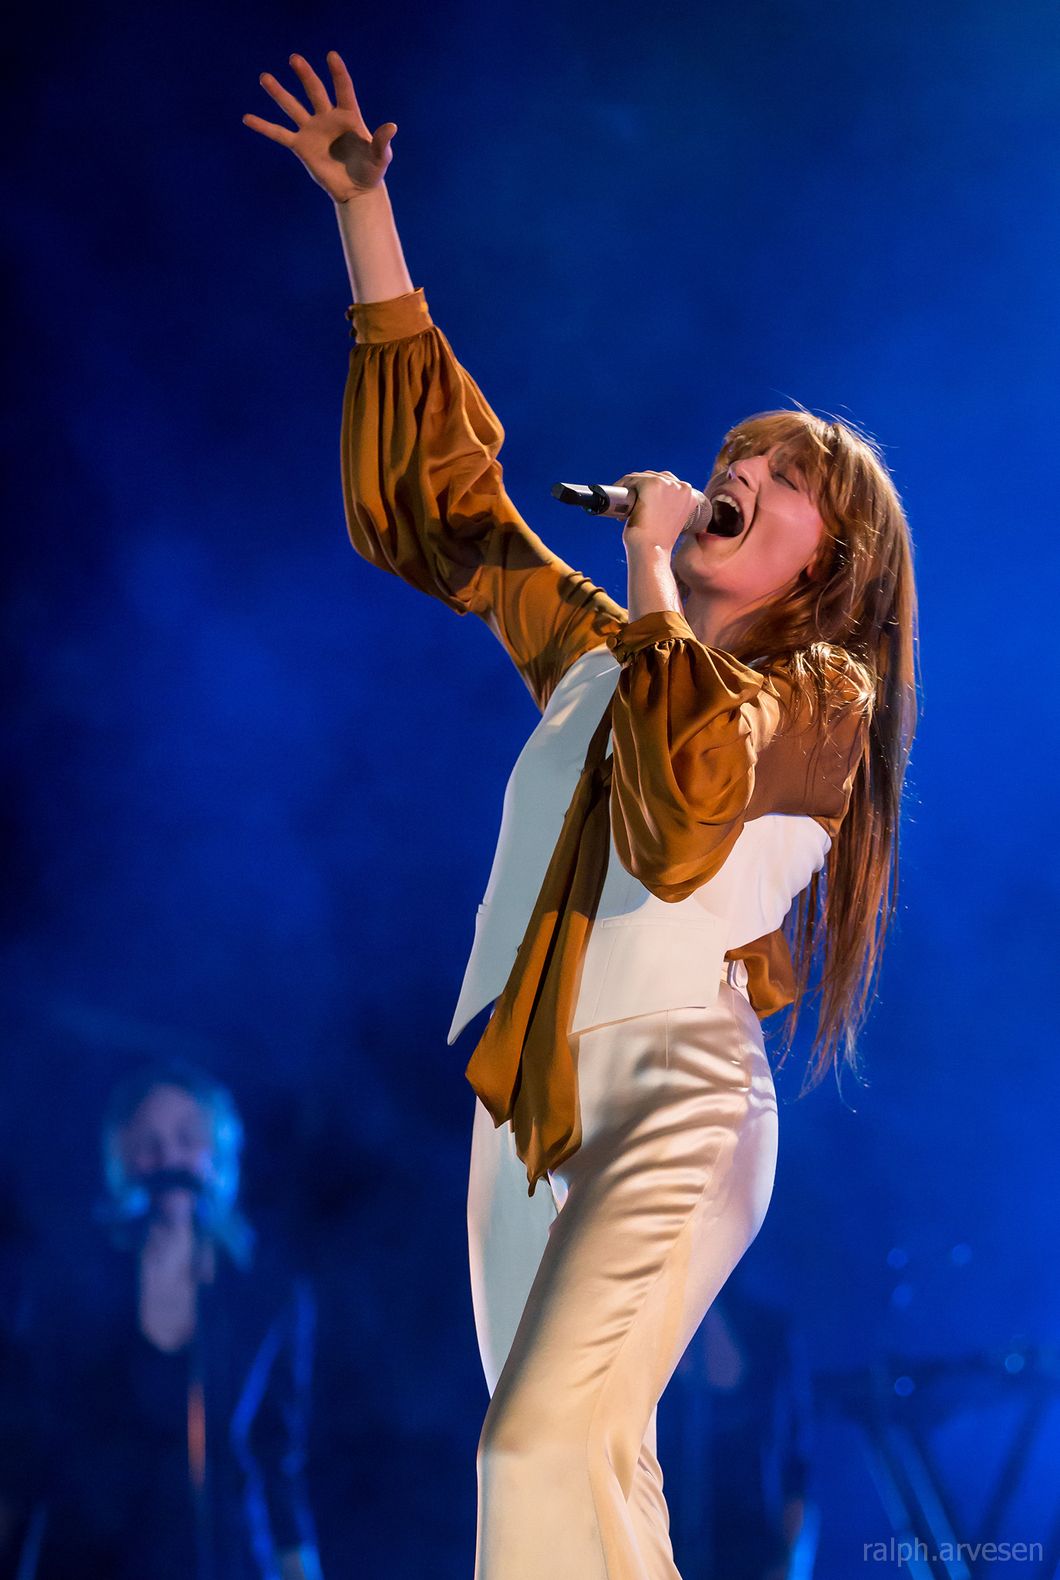 https://commons.wikimedia.org/wiki/File:Florence_and_the_Machine_(22117304699).jpg